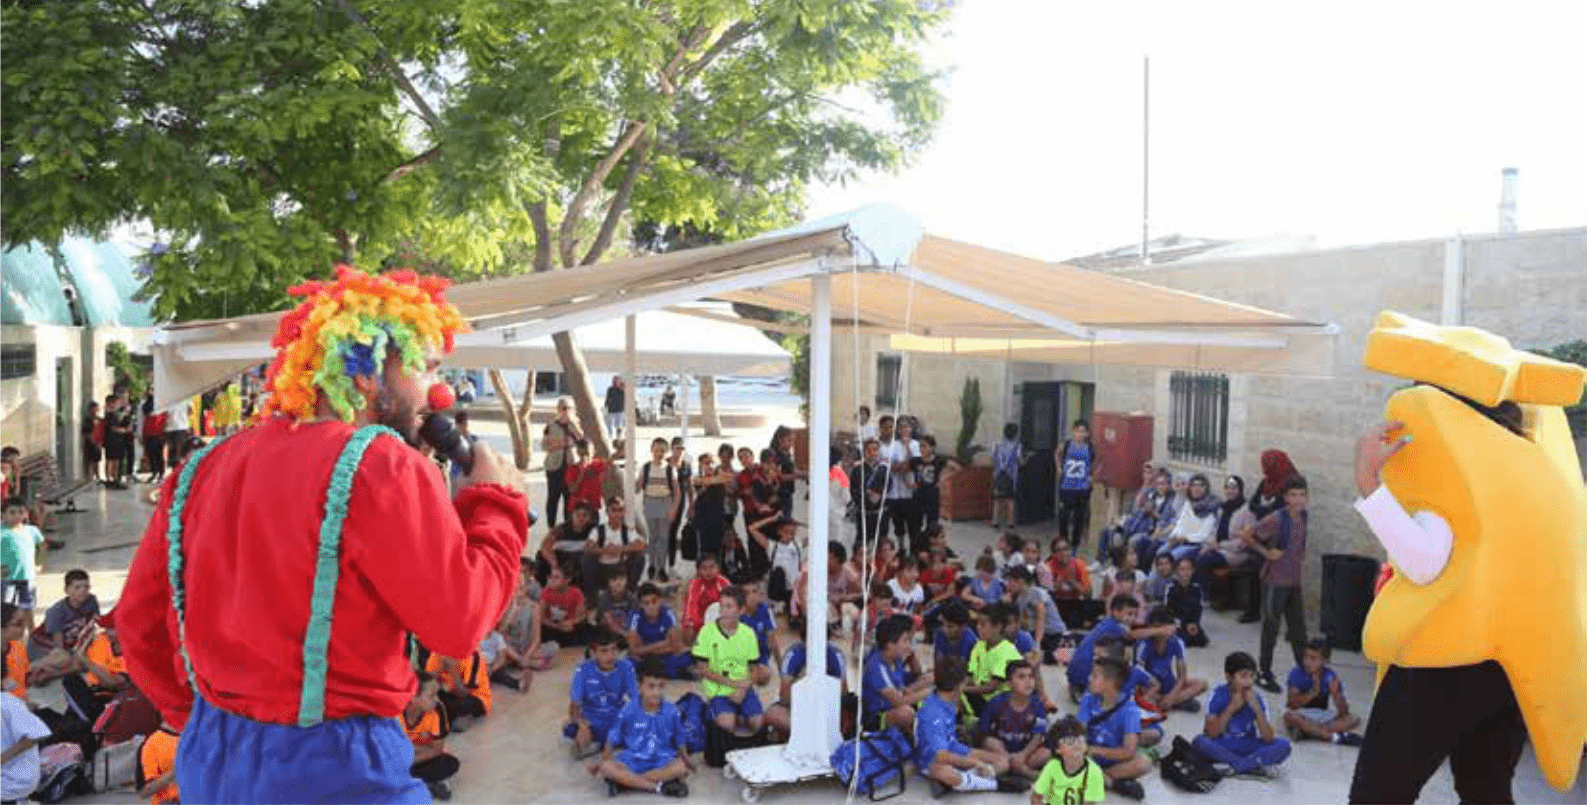 BALL Organizes the Second Open Day for Children